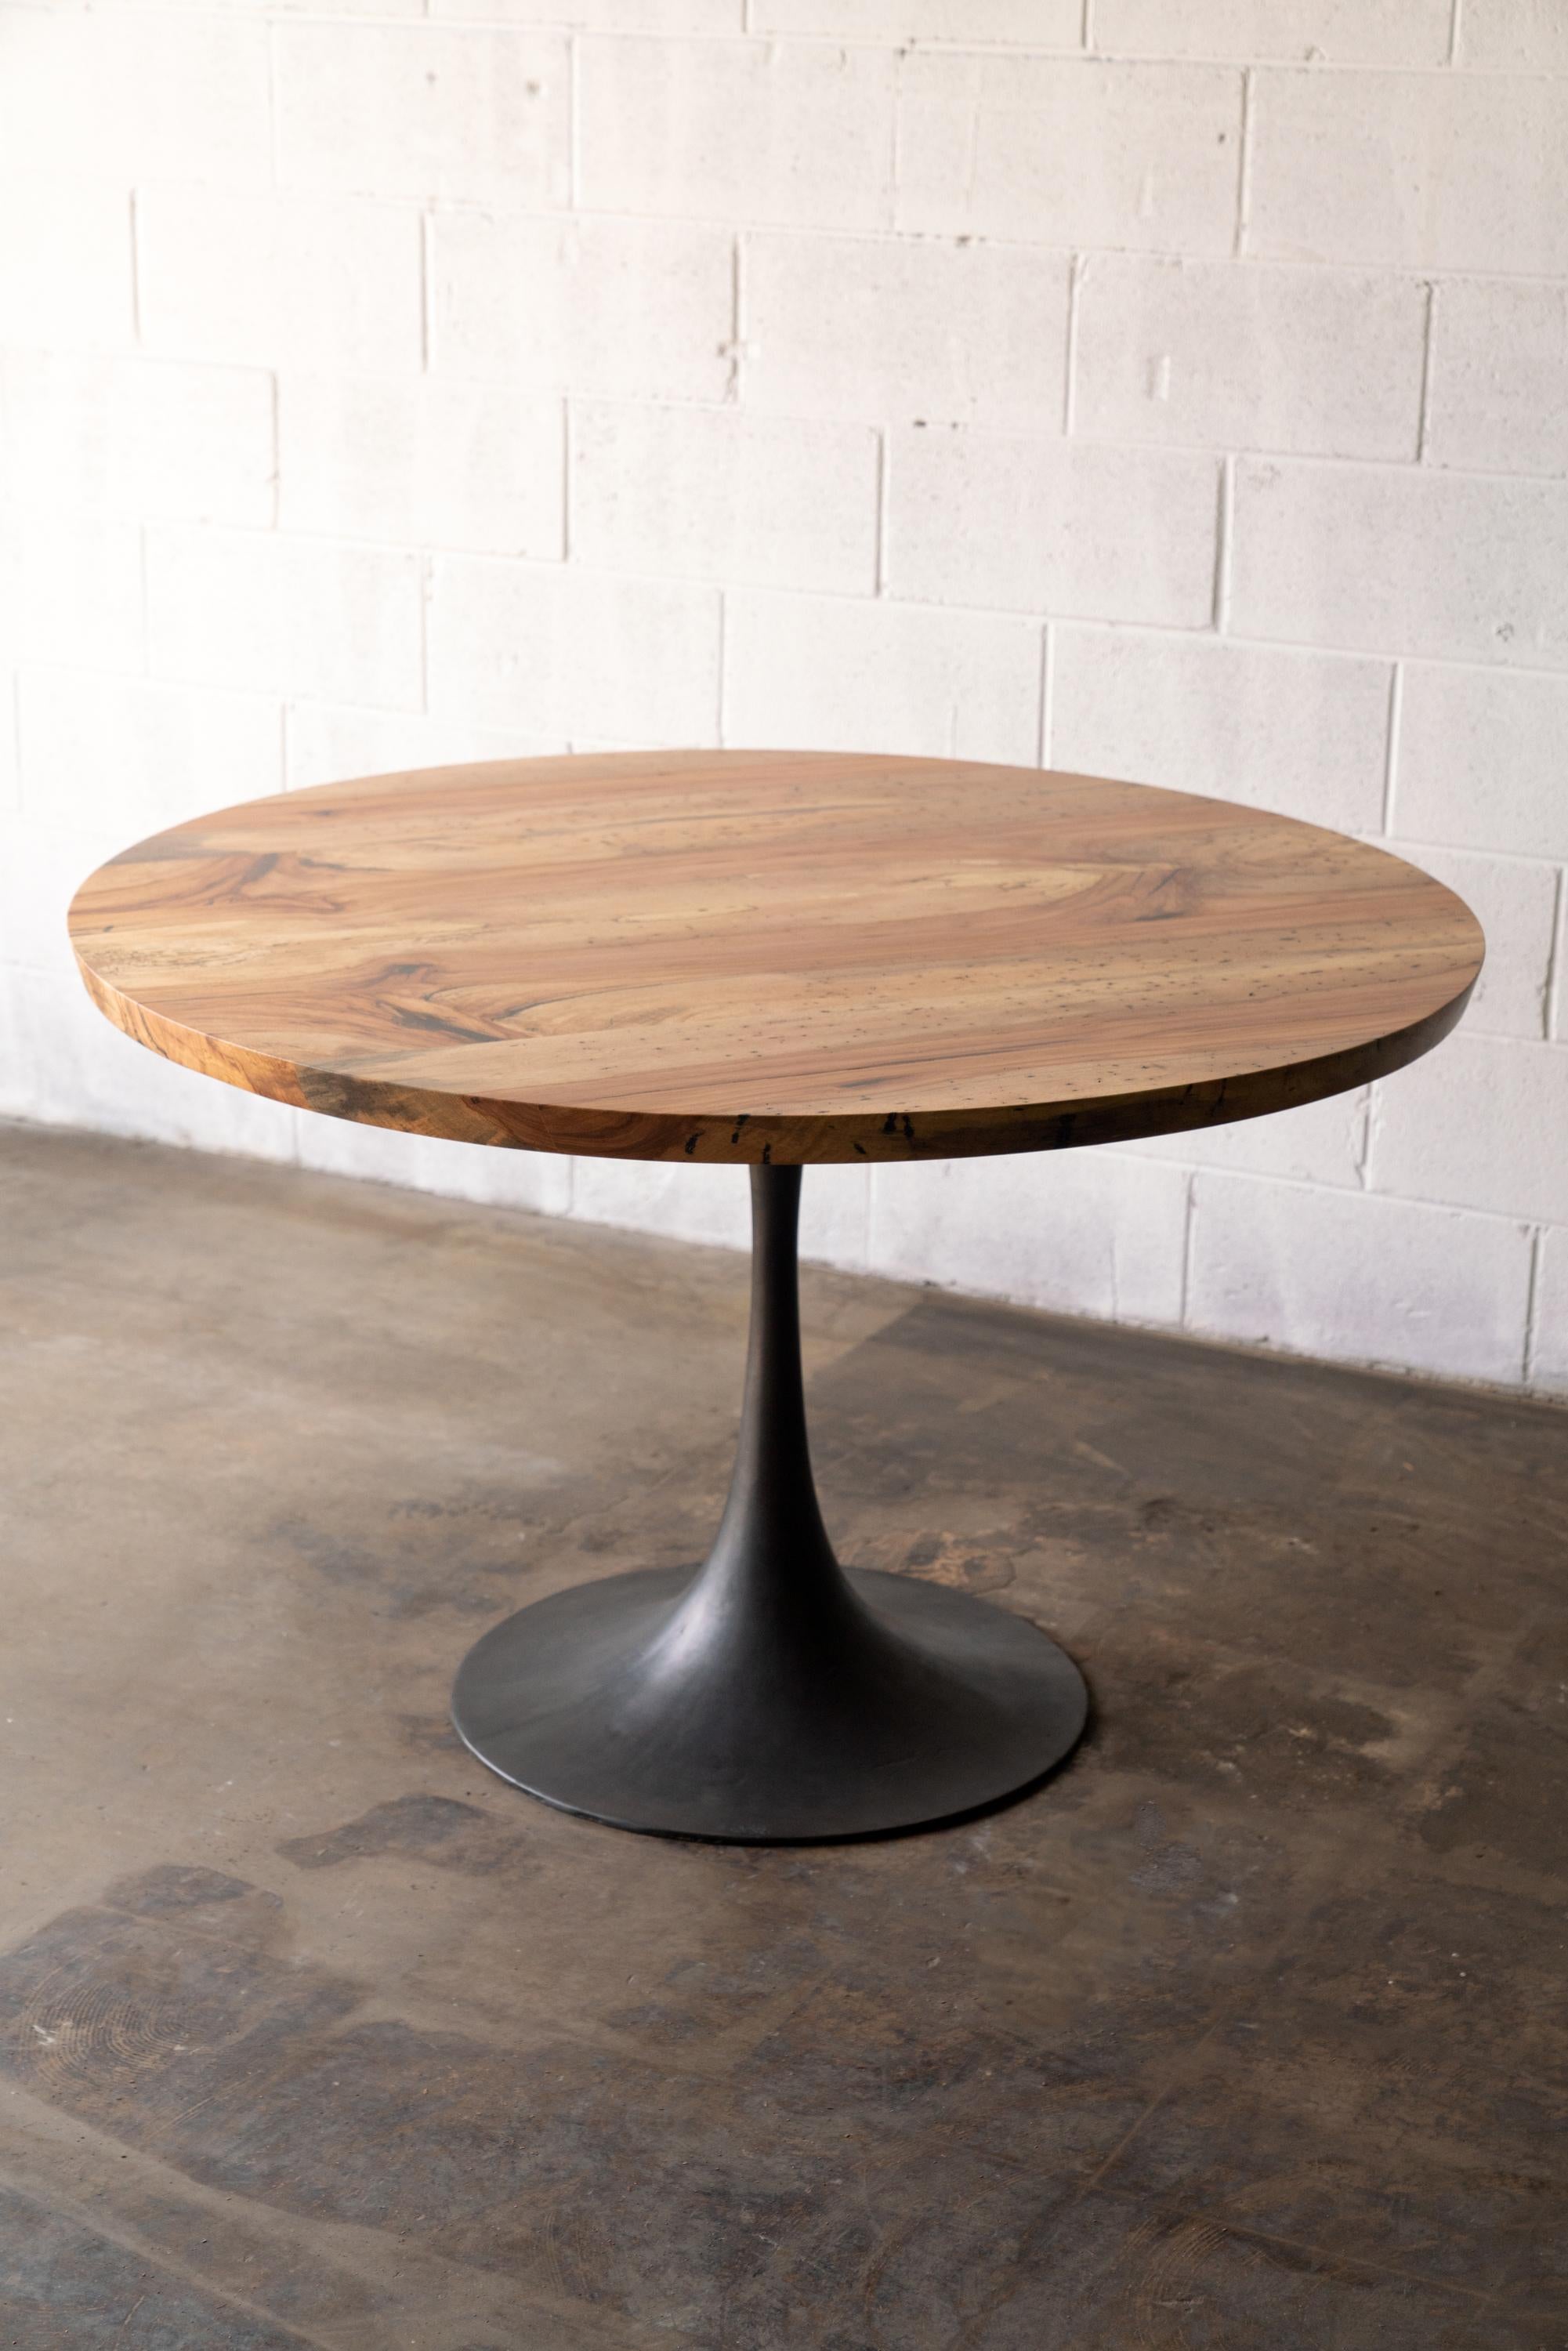 The Amicalola base captures the room set against a round or oval table top. This pedestal base is hand cast by the artisans at Sloss Furnaces historic foundry in Birmingham to look beautiful and function out of the way of diner's feet. Rich with